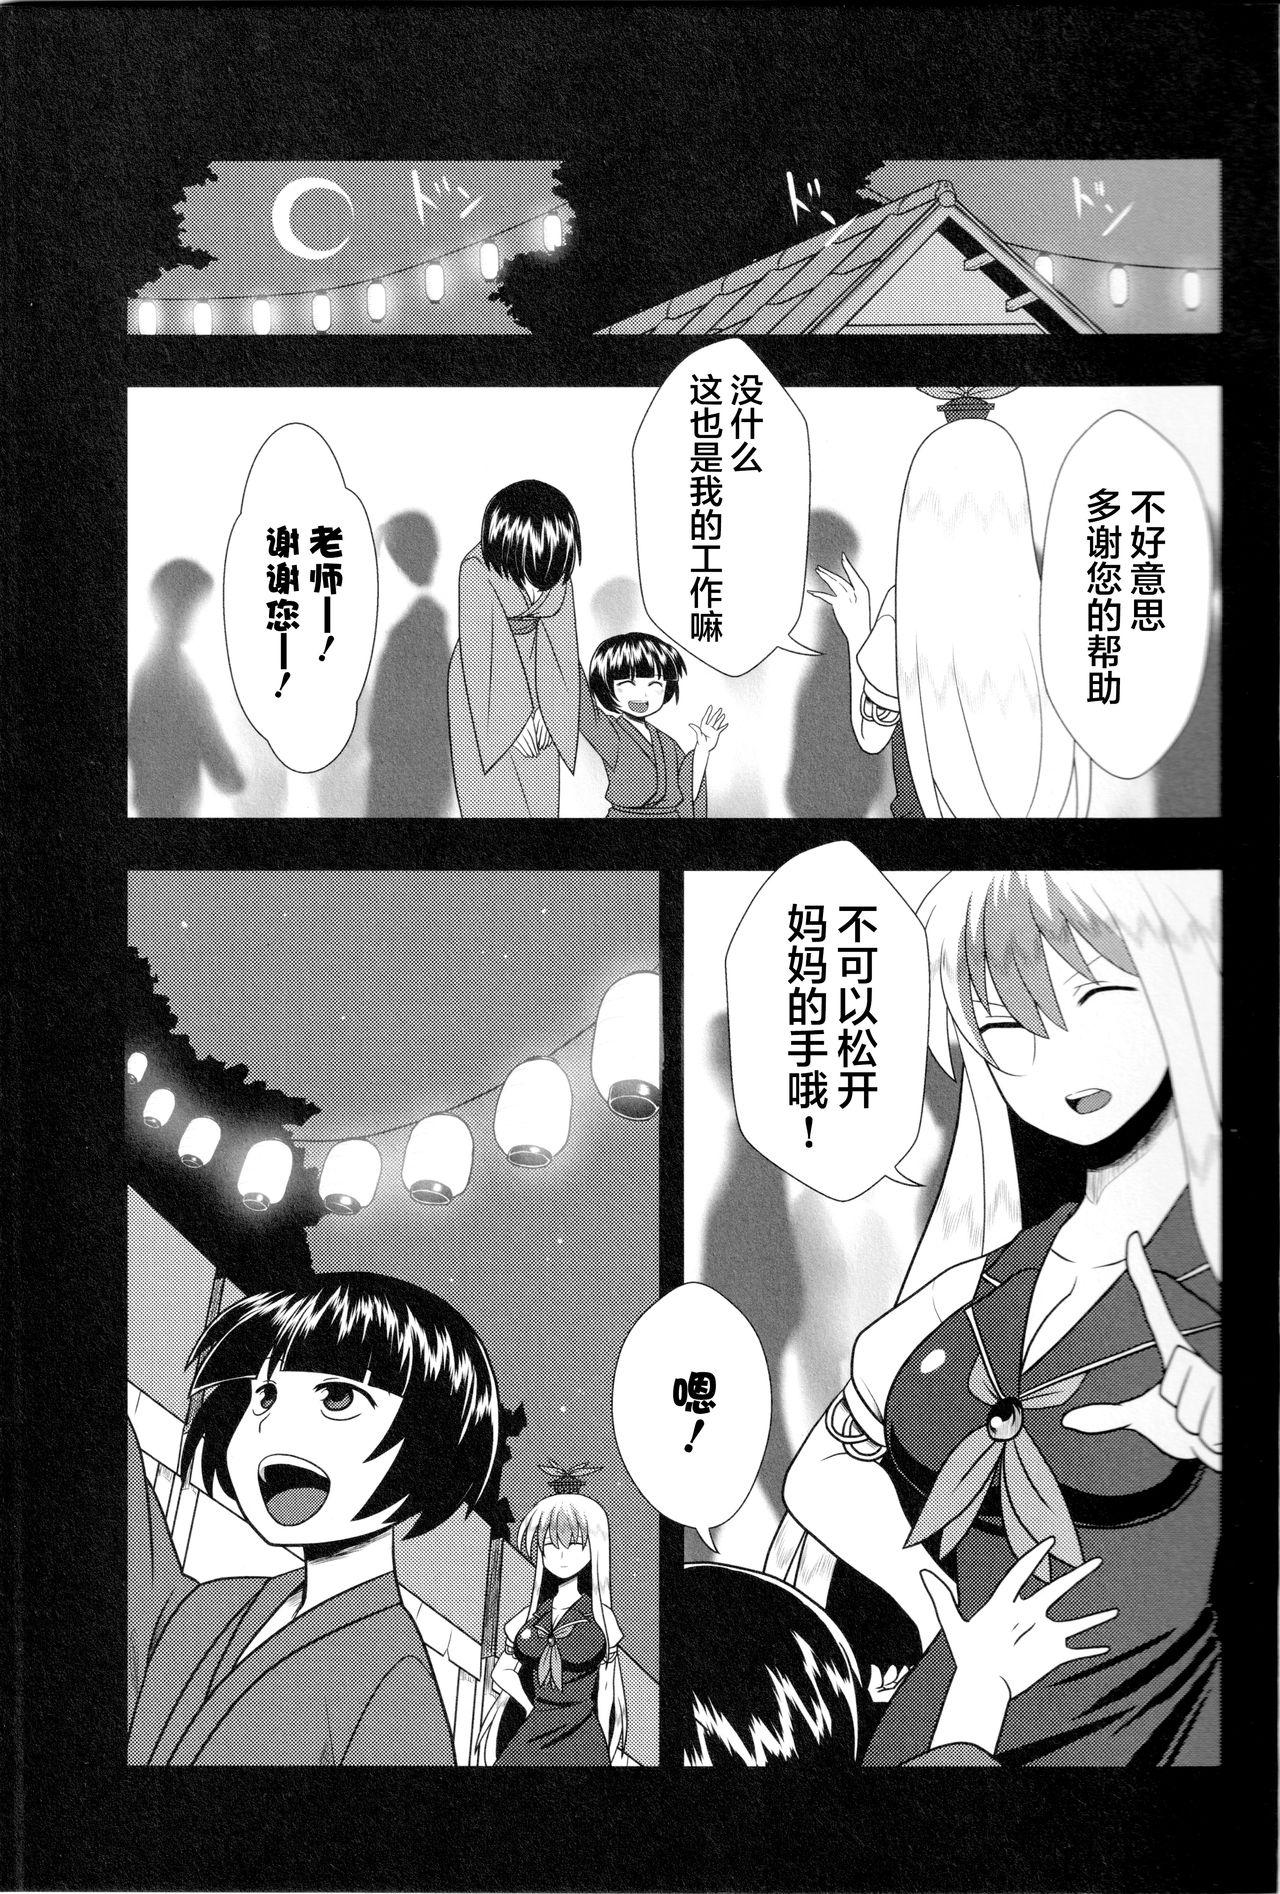 Picked Up kyo no korindo - Touhou project Gay Dudes - Page 8